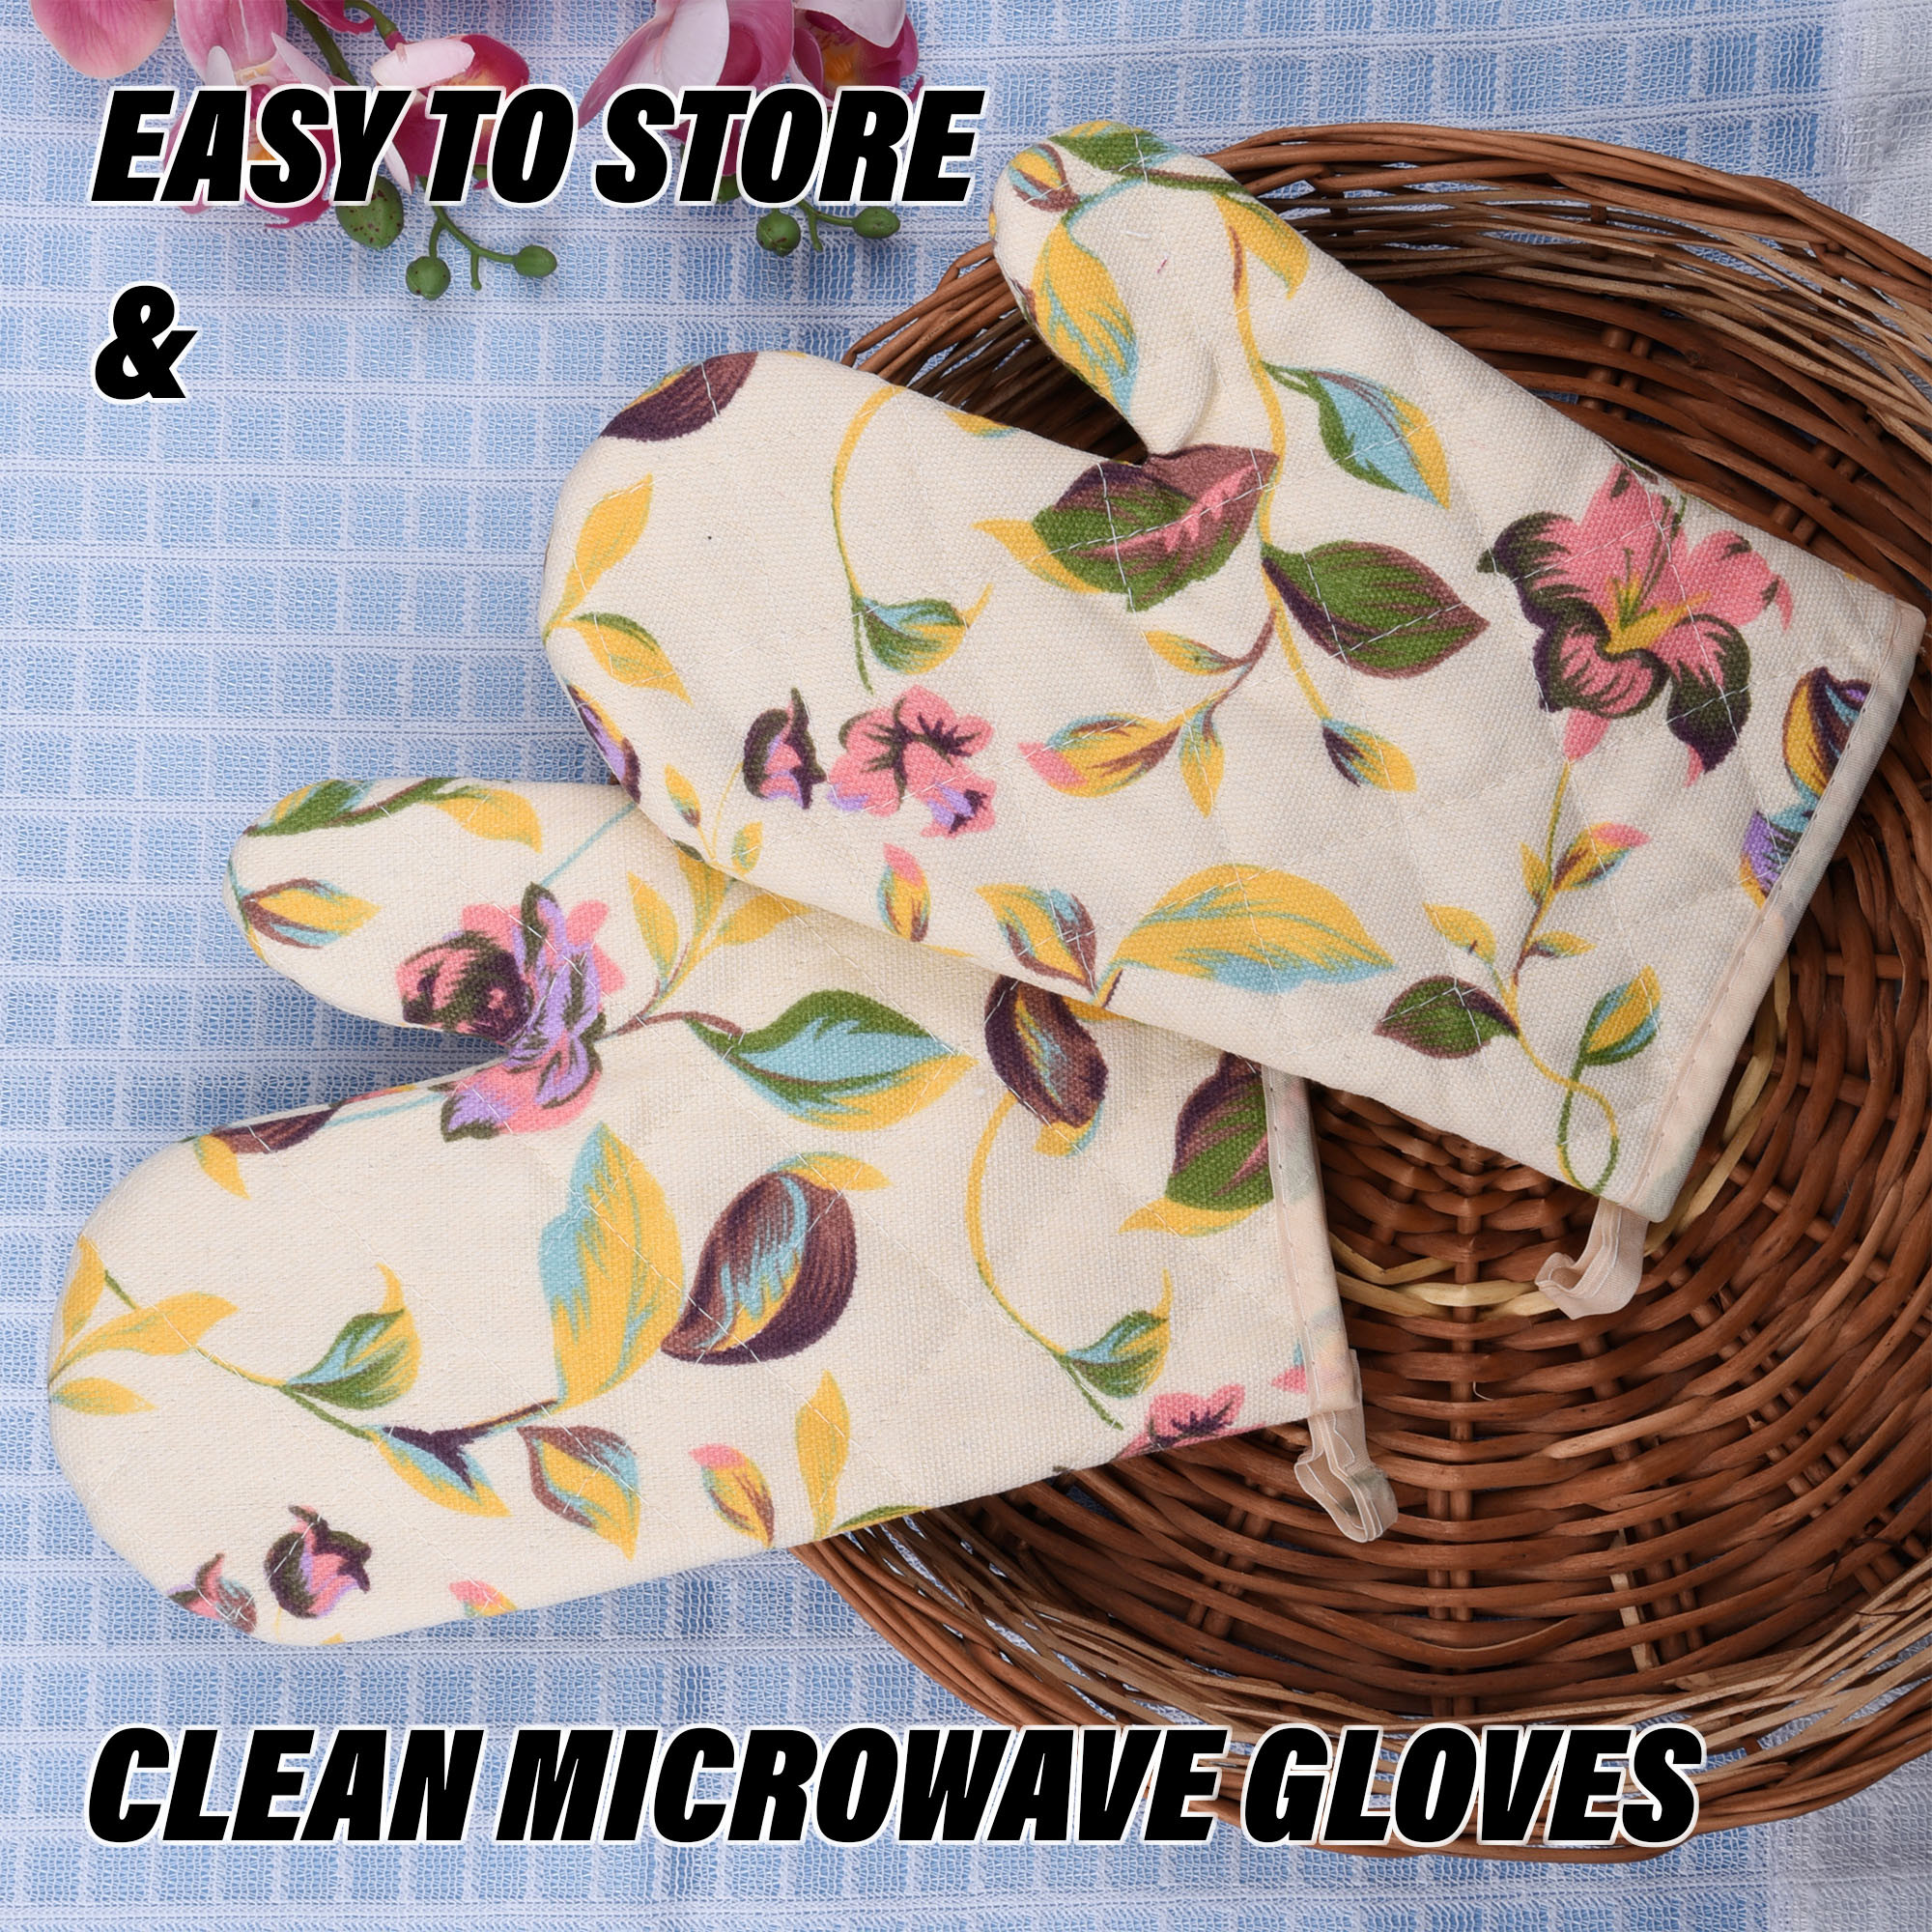 Kuber Industries Oven Mitts | Kitchen Gloves | Microwave Oven Gloves | Leaf Print Hanging Loop Oven Gloves | Insulated Gloves for Oven | Heat Resistant |Cream